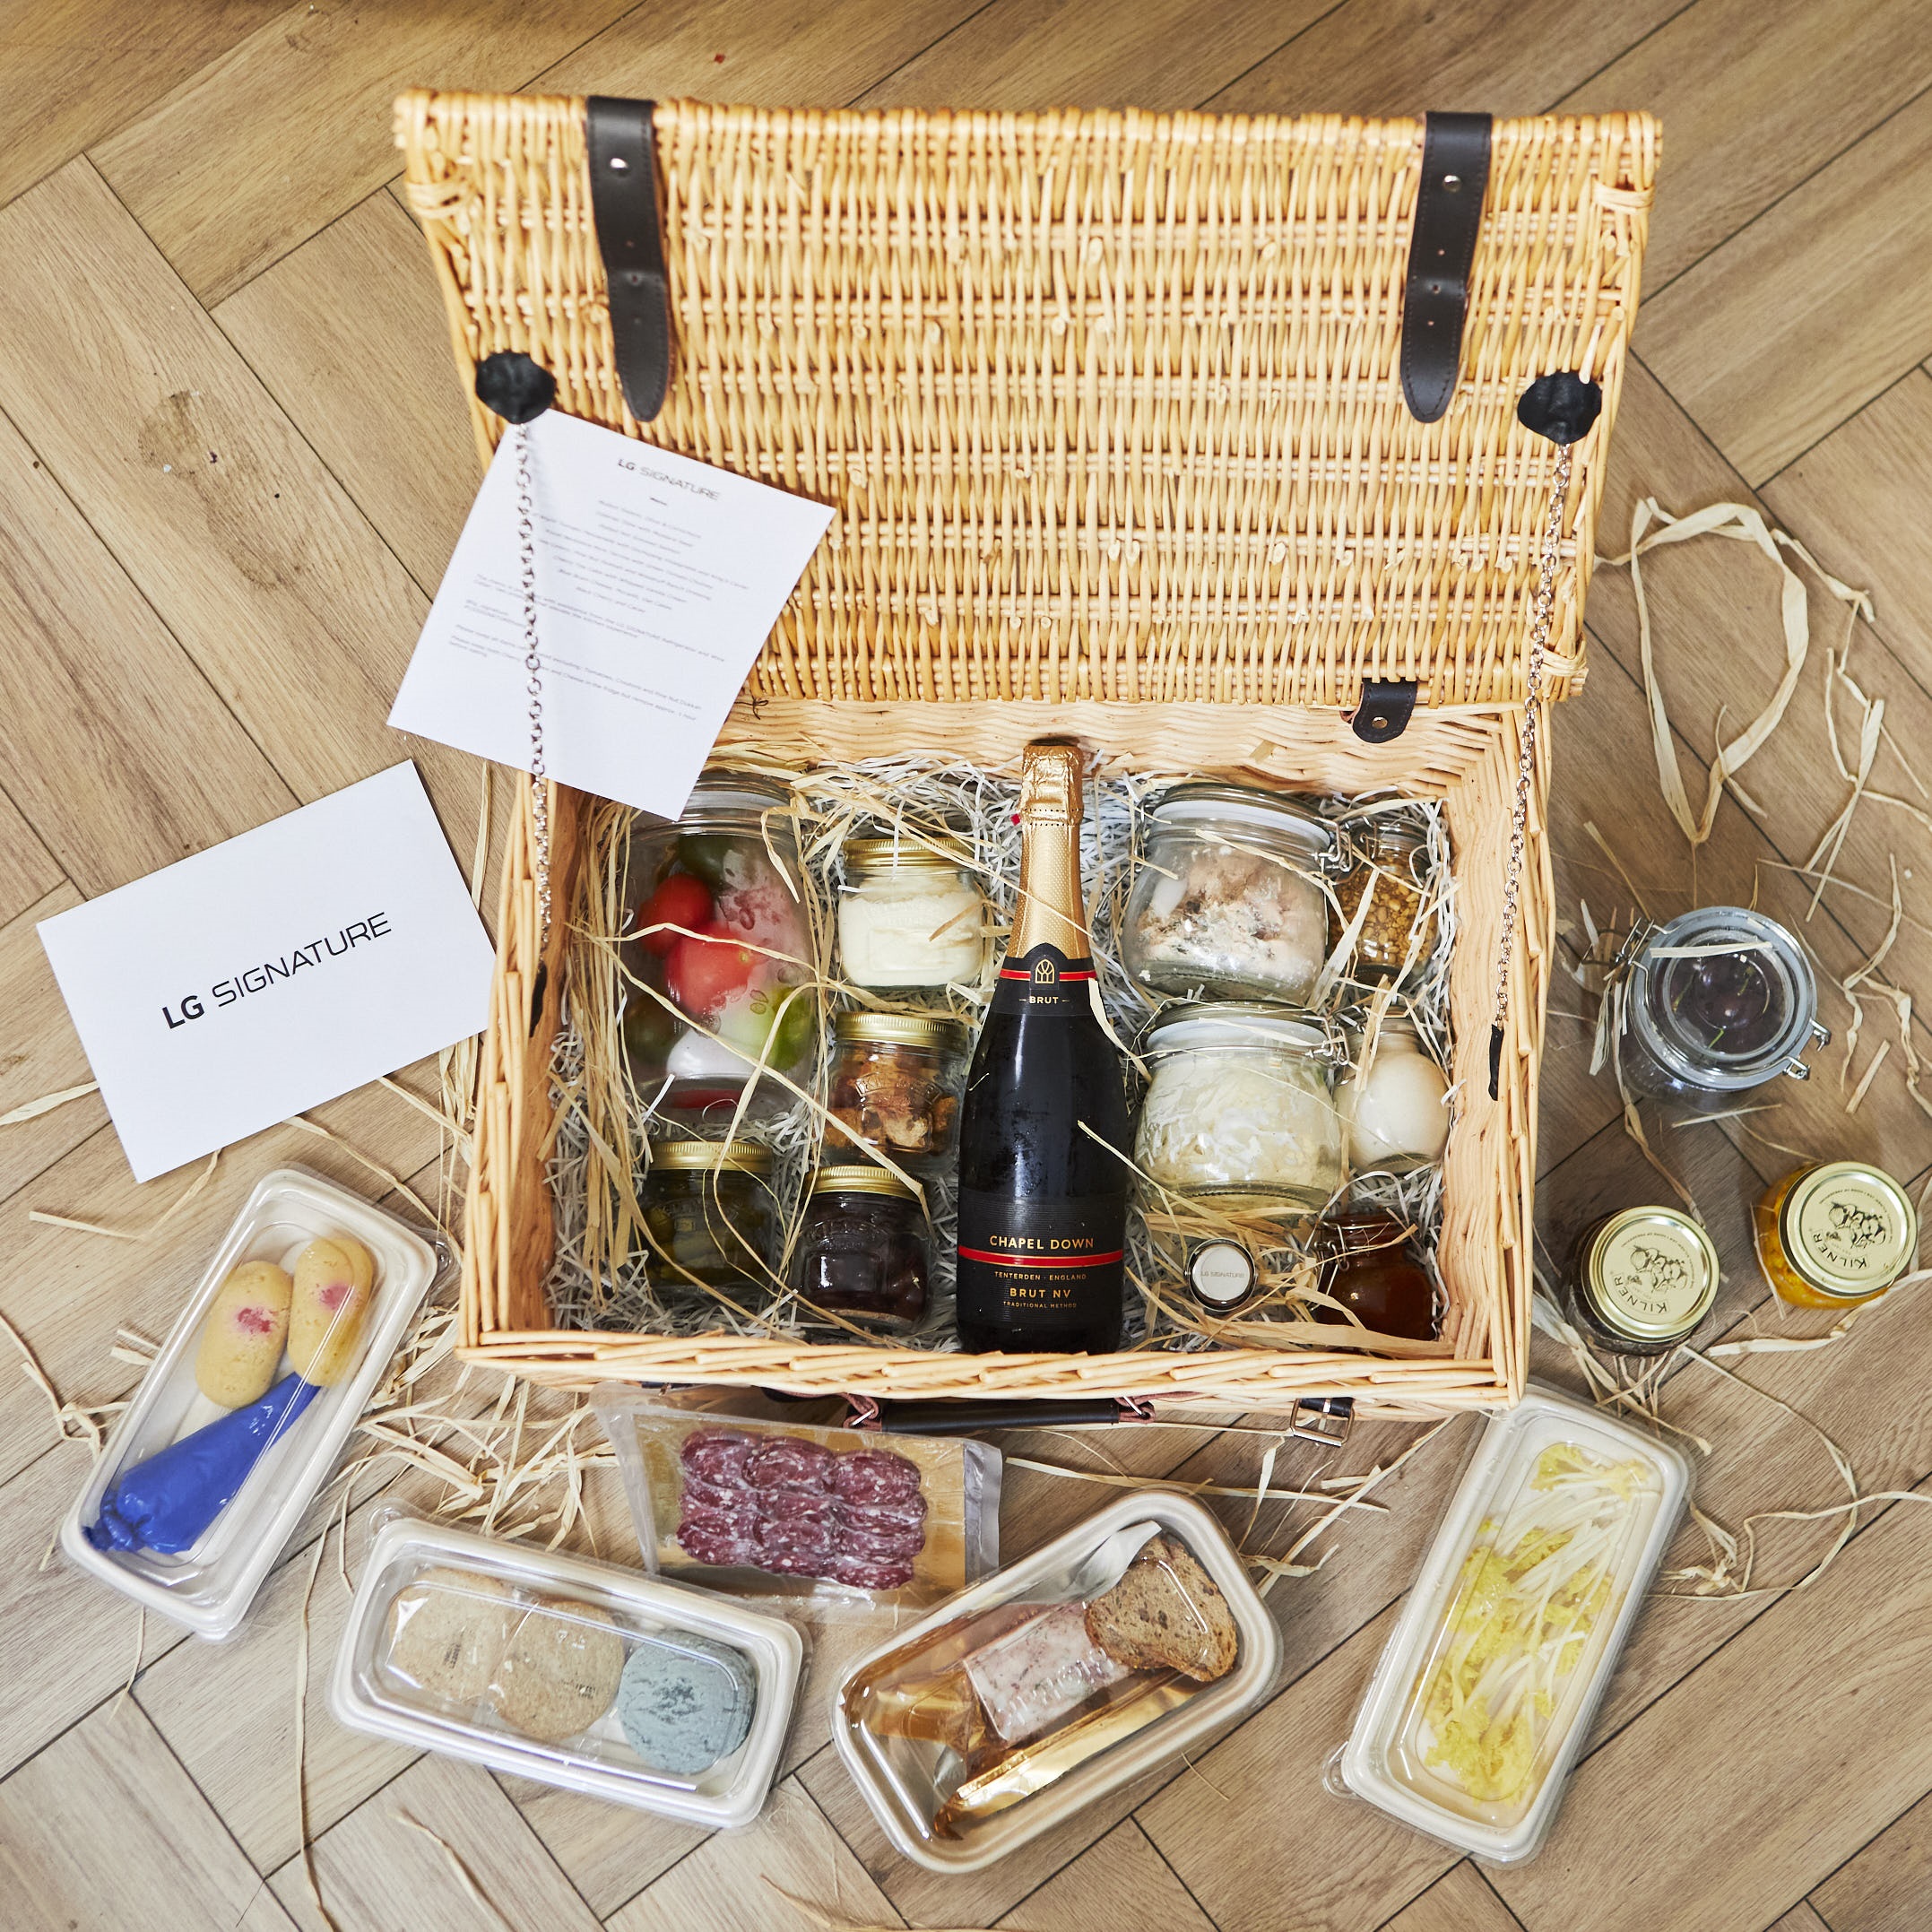 A luxurious picnic hamper presented to guests participated in a virtual LG SIGNATURE event